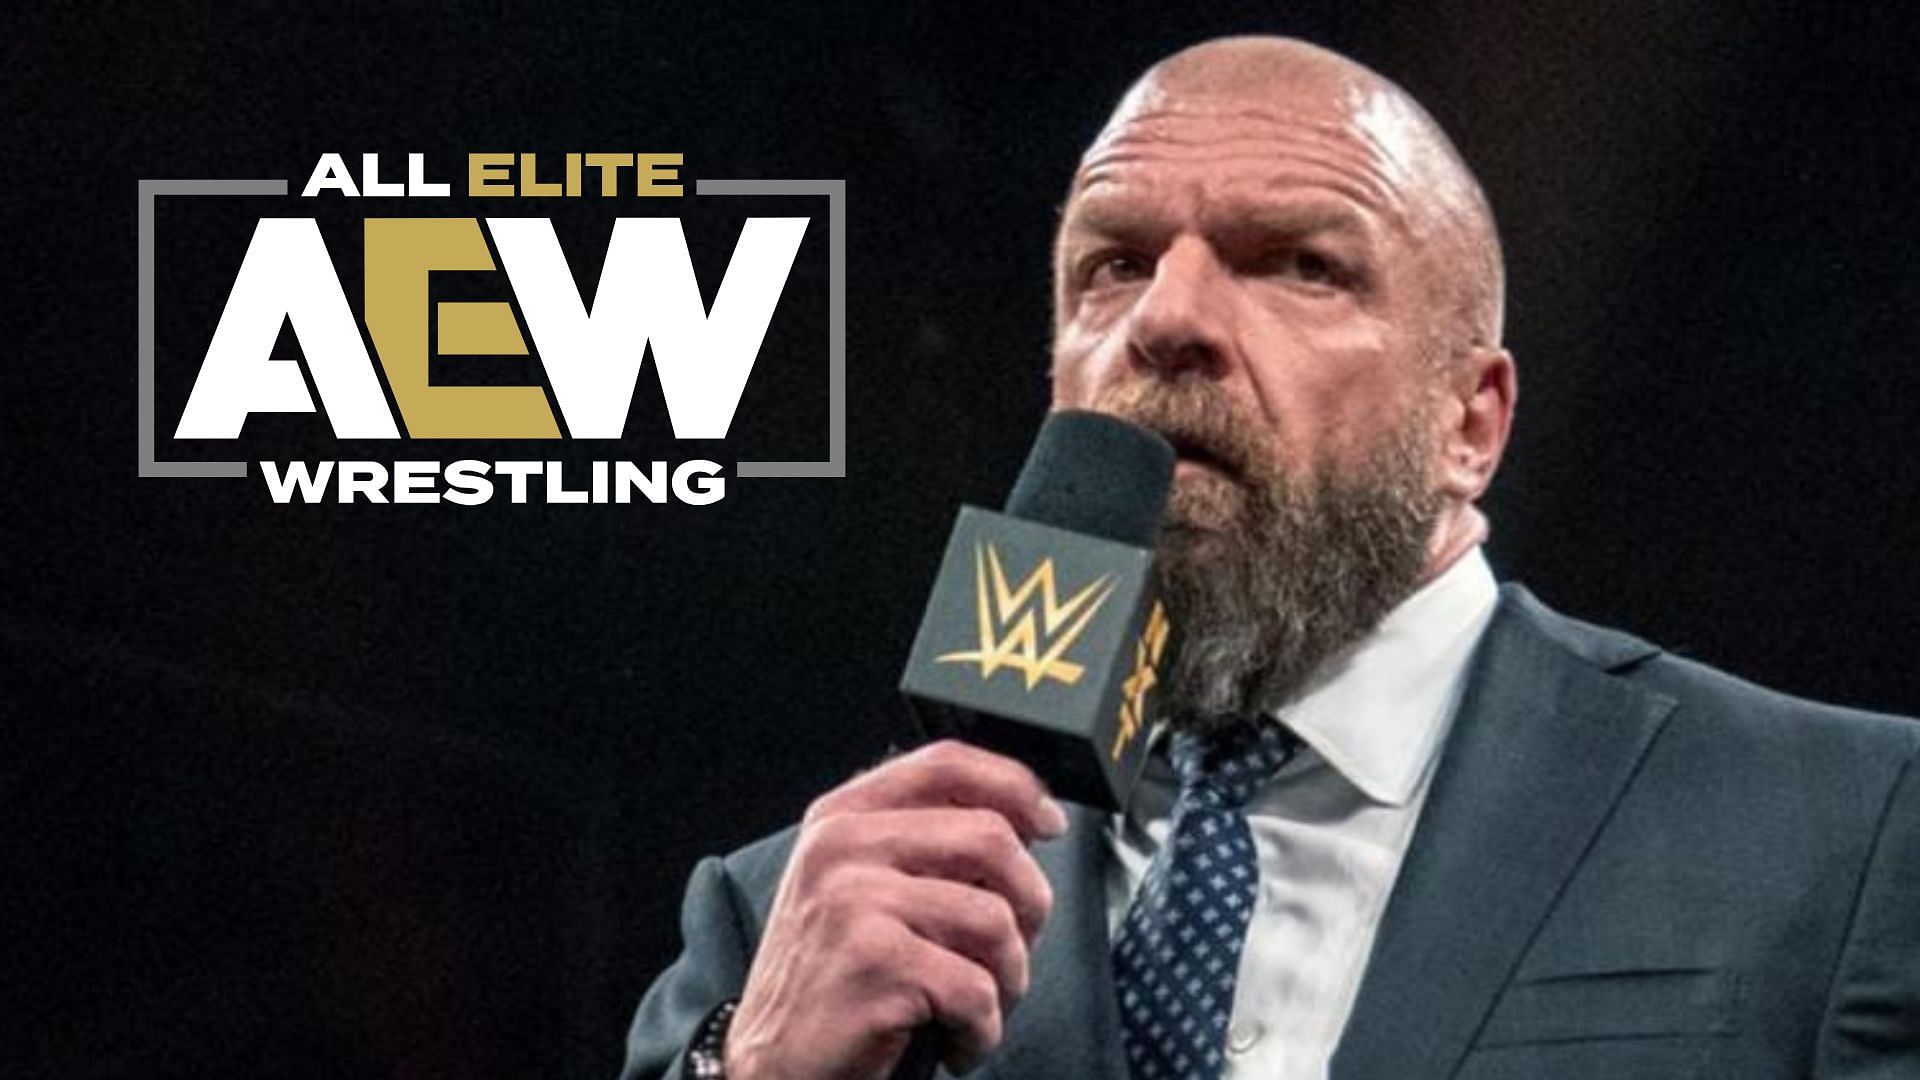 It appears WWE wanted a former world champion before AEW